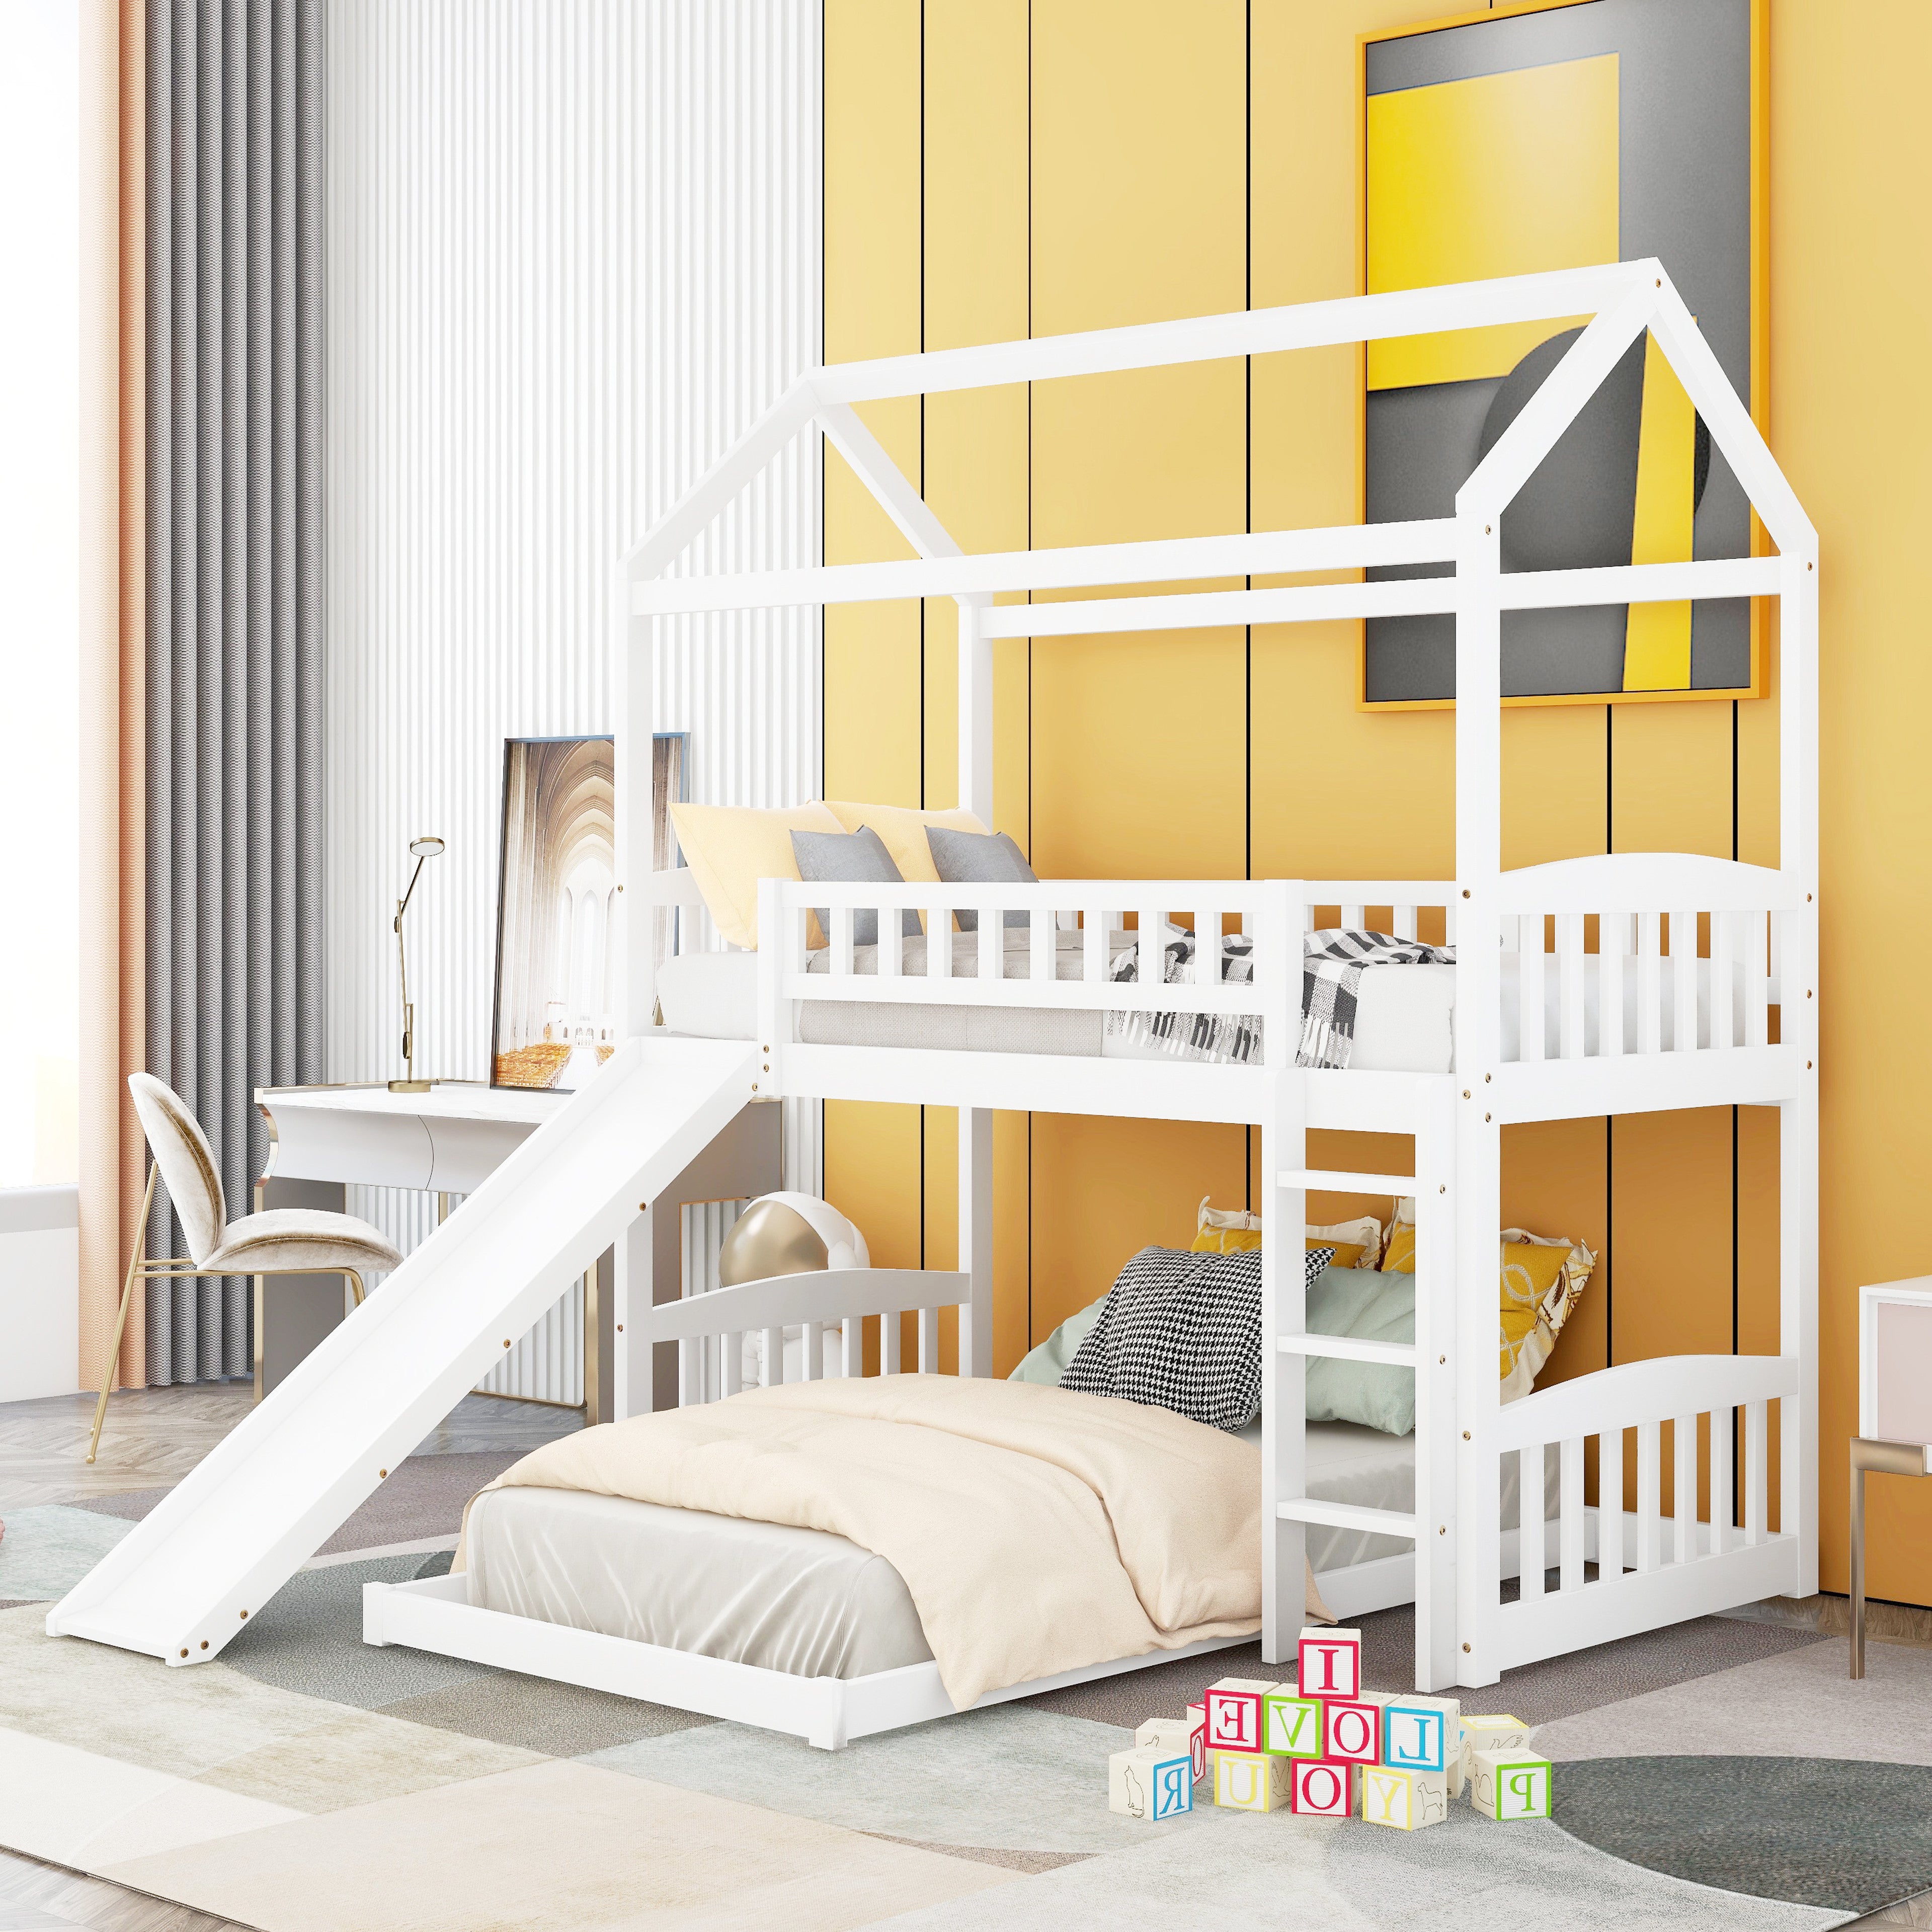 Bellemave House Bunk Bed with Slide, Wood Twin Over Twin L-Shape Bunk Bed Frame with Ladder for Kids Teens (White)